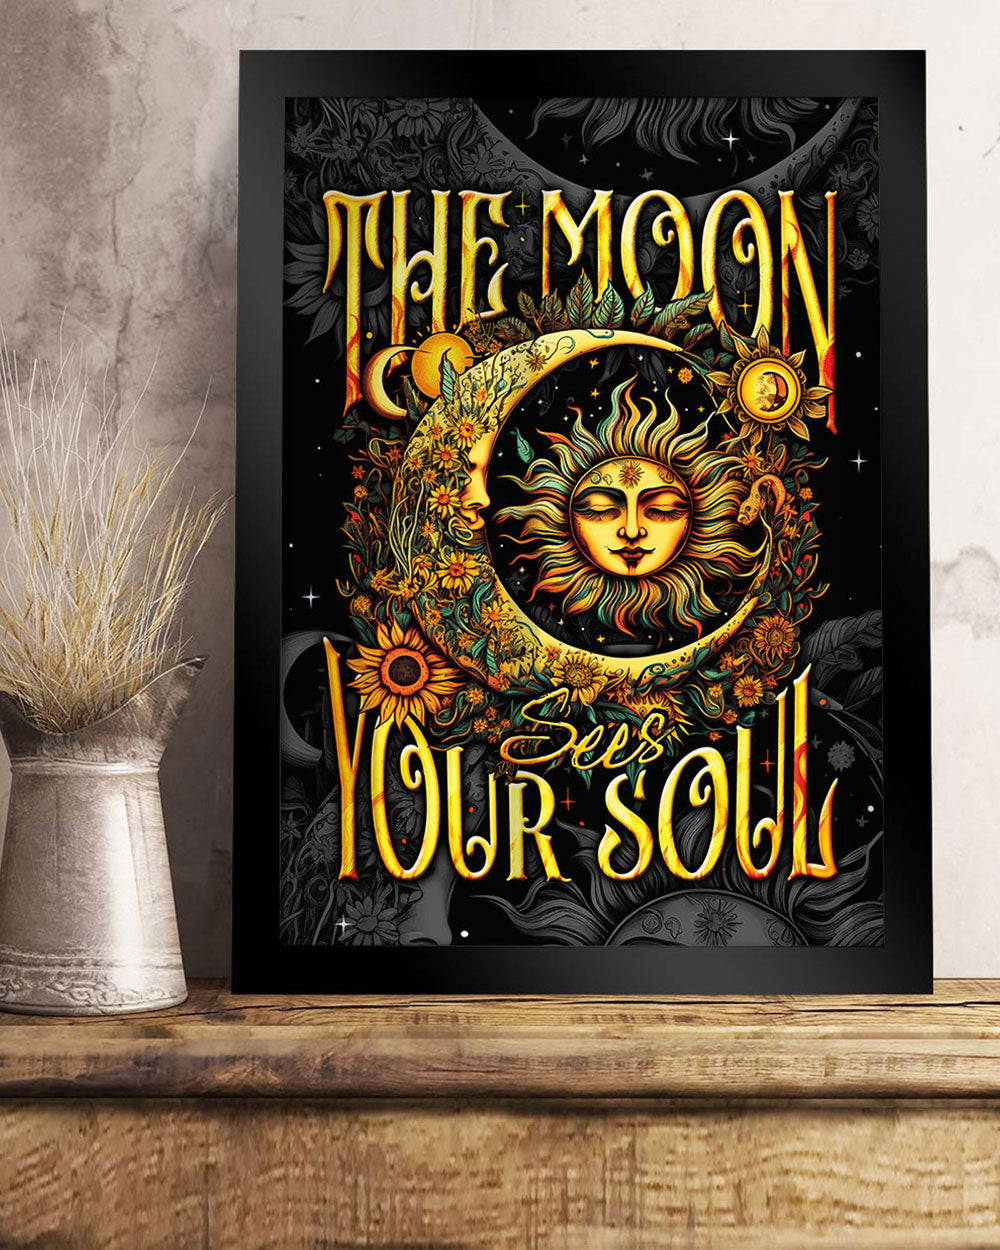 THE MOON SEES YOUR SOUL POSTER - TY1104234